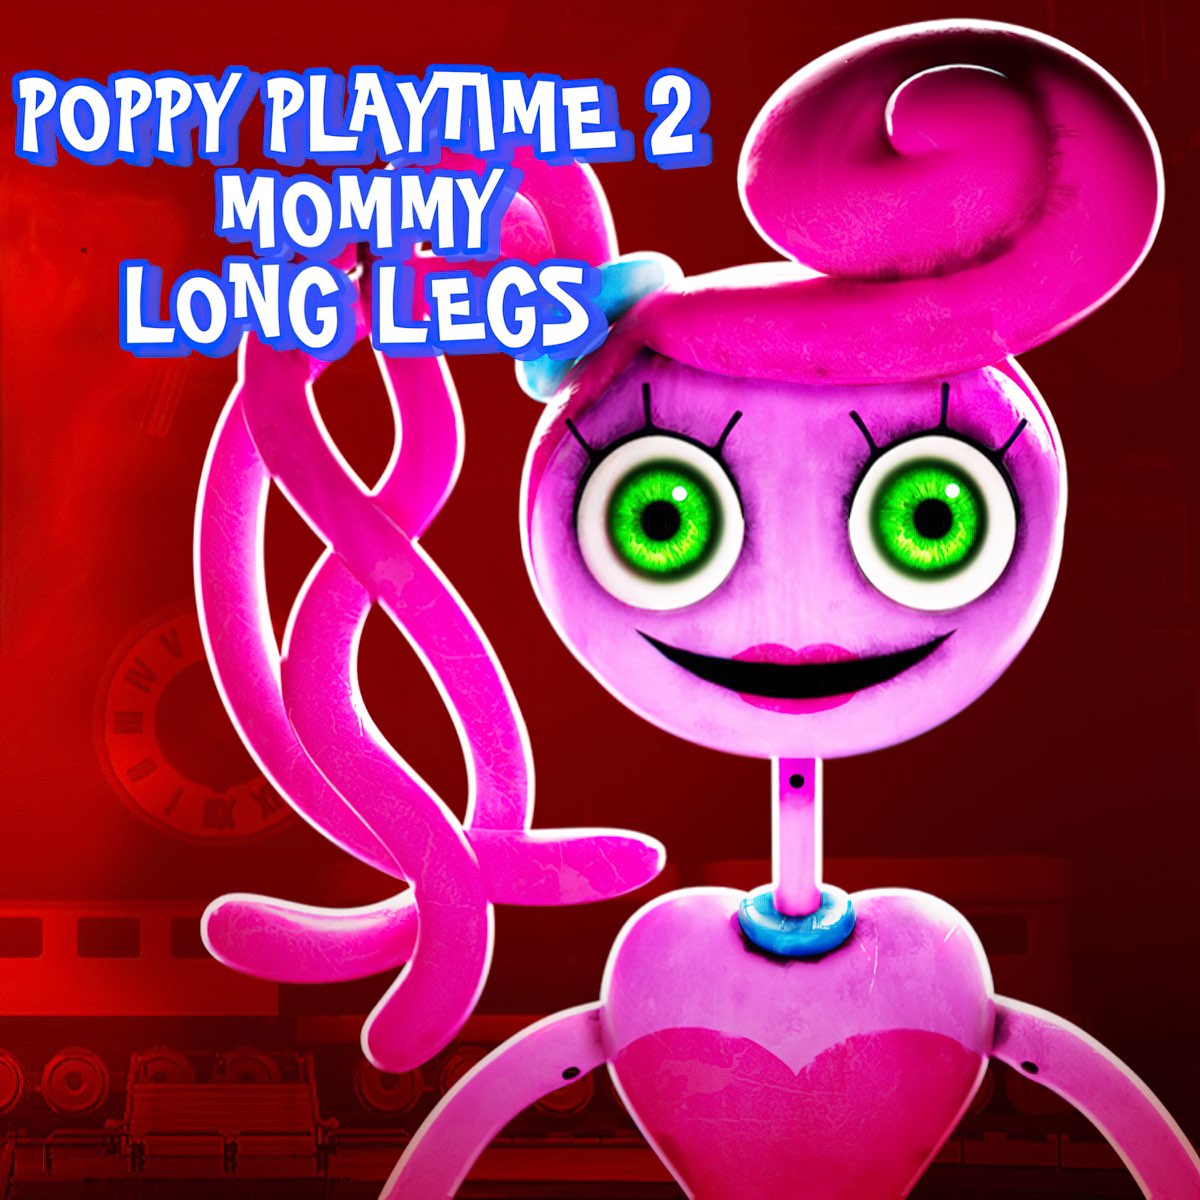 CHAPTER 2 POPPY PLAYTIME - MOMMY LONG LEGS APARECEU [ Capitulo 2 Poppy  Playtime ] 